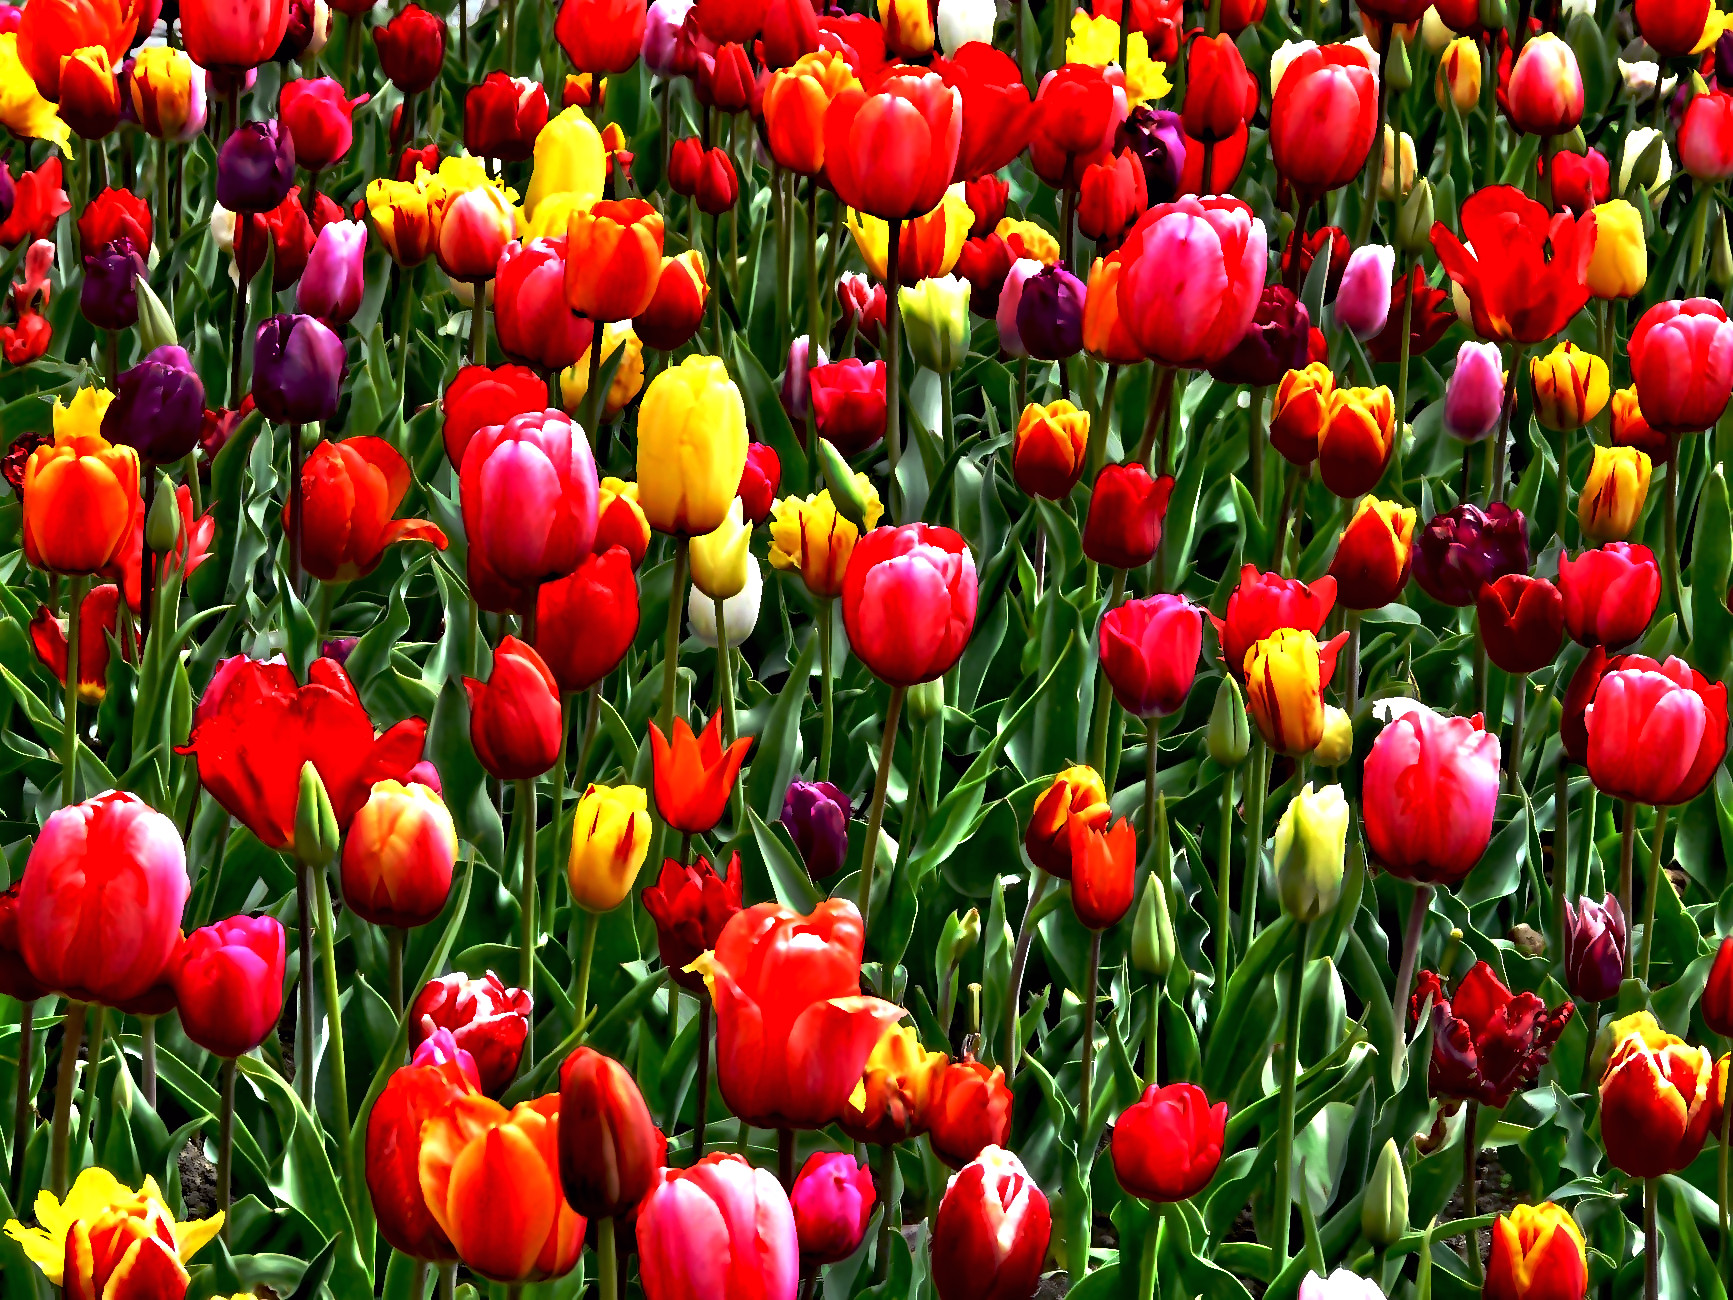 2020-06-24 10-46-06tulips-bed-colorful-color-69776 with a coloured bas-relief effect.jpeg